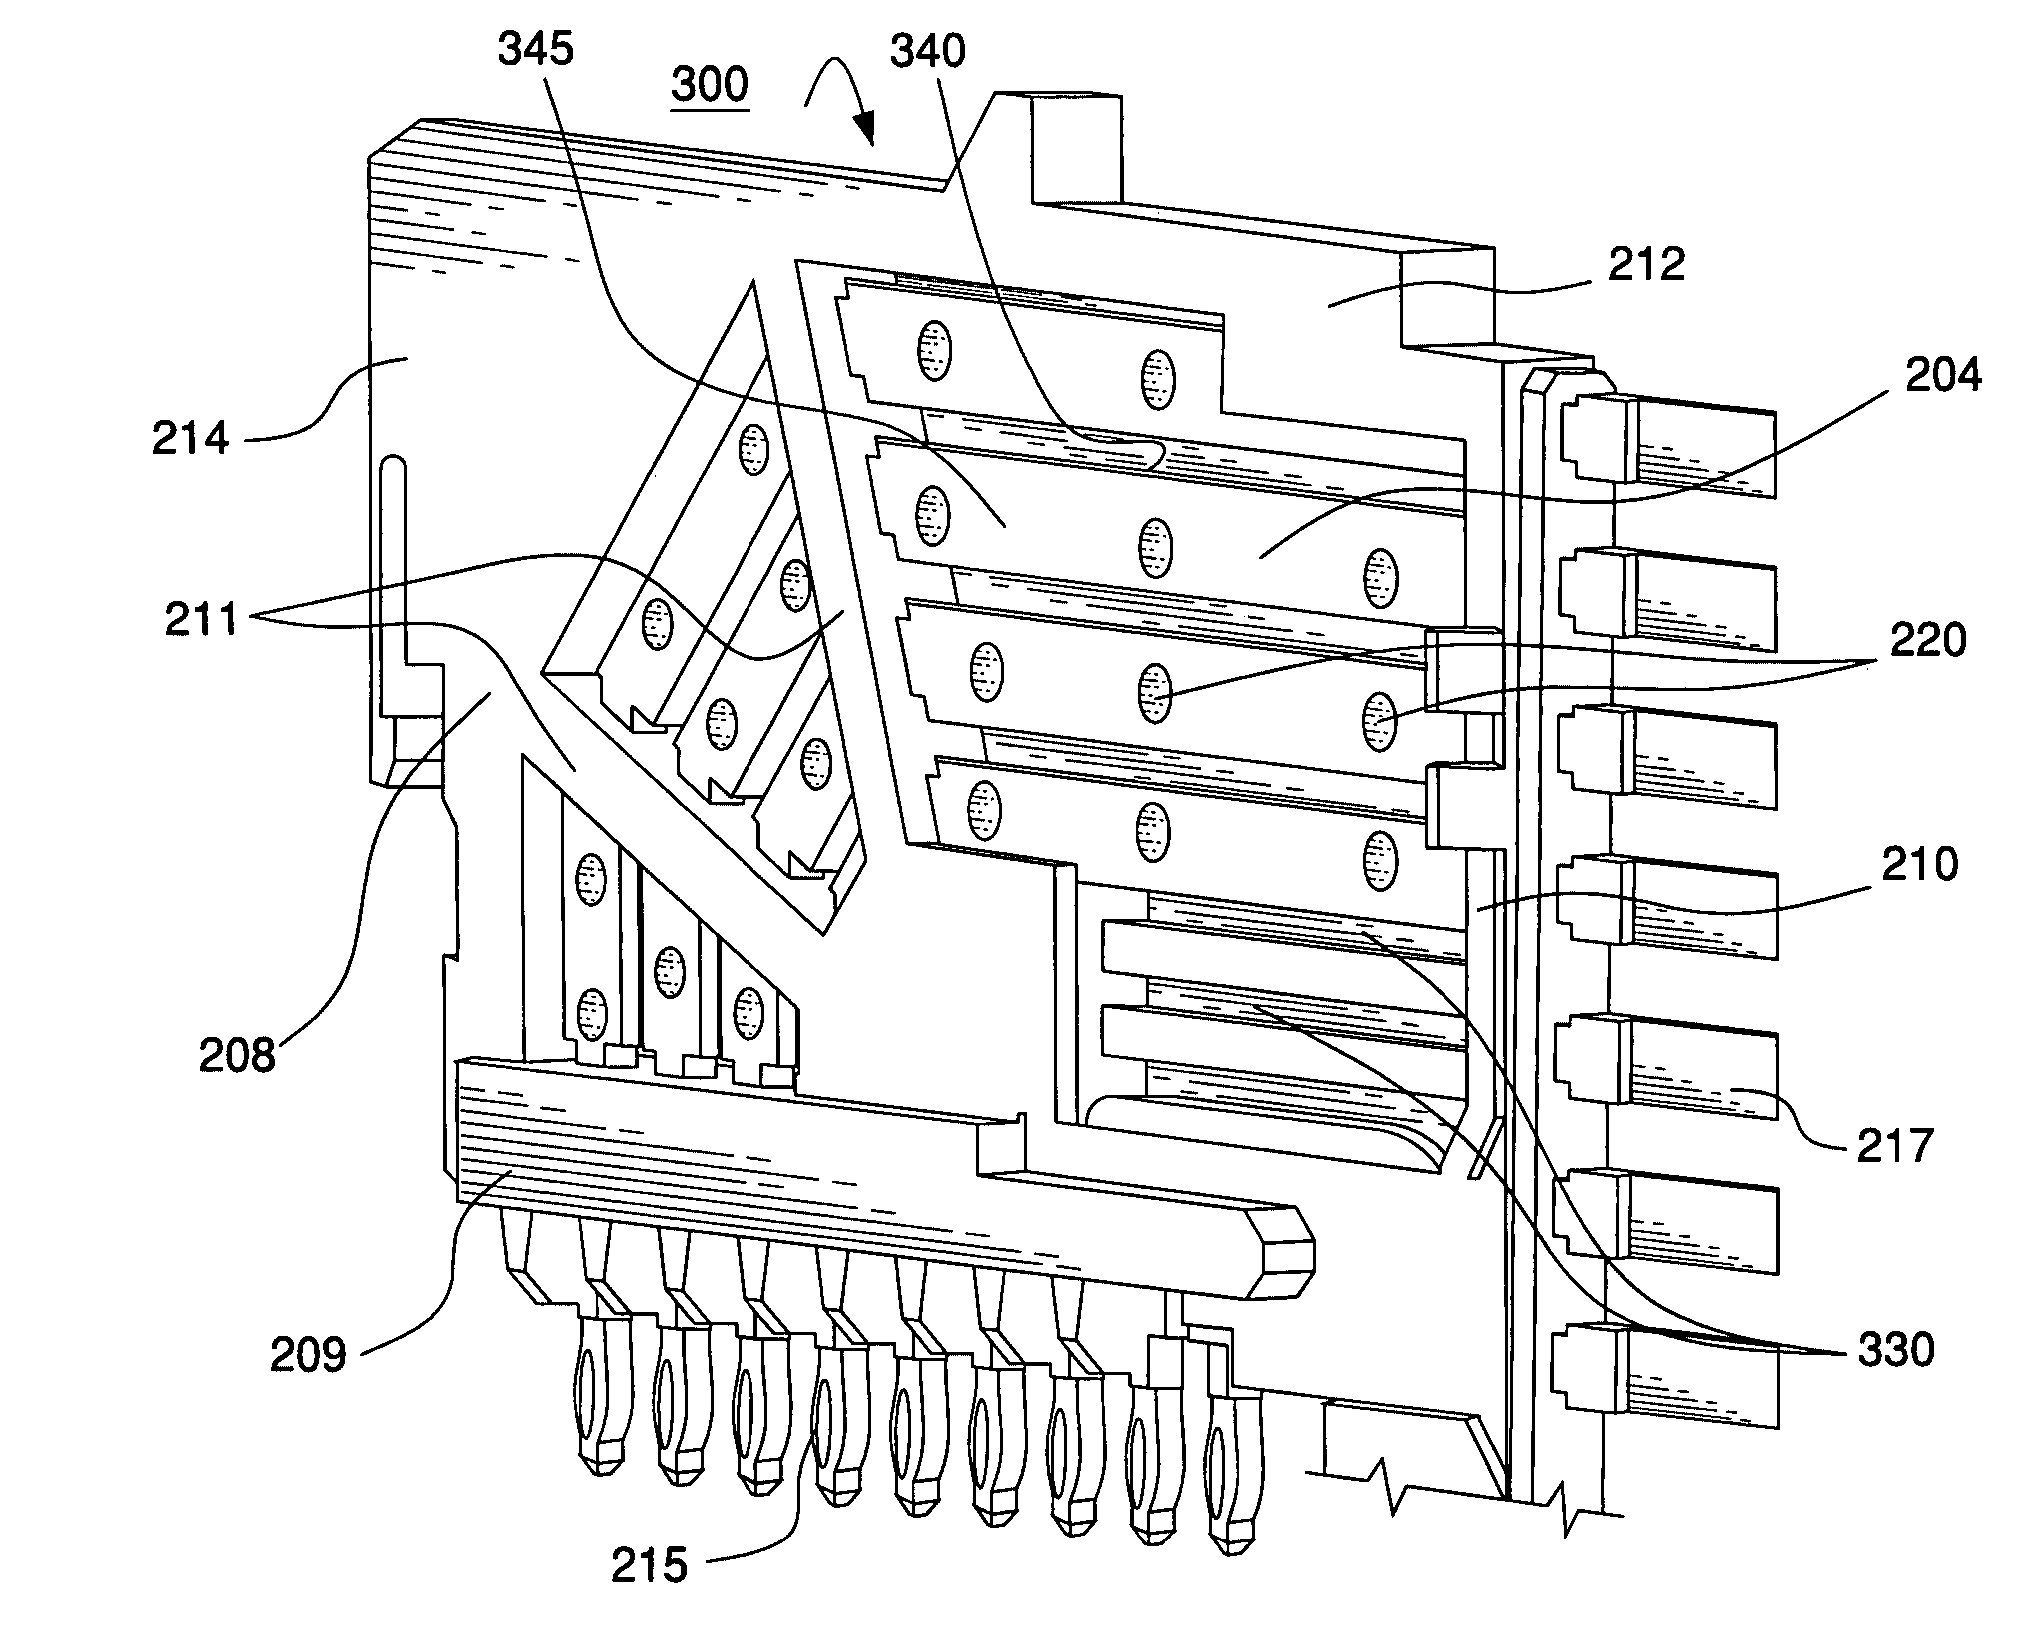 Mechanically robust lead frame assembly for an electrical connector